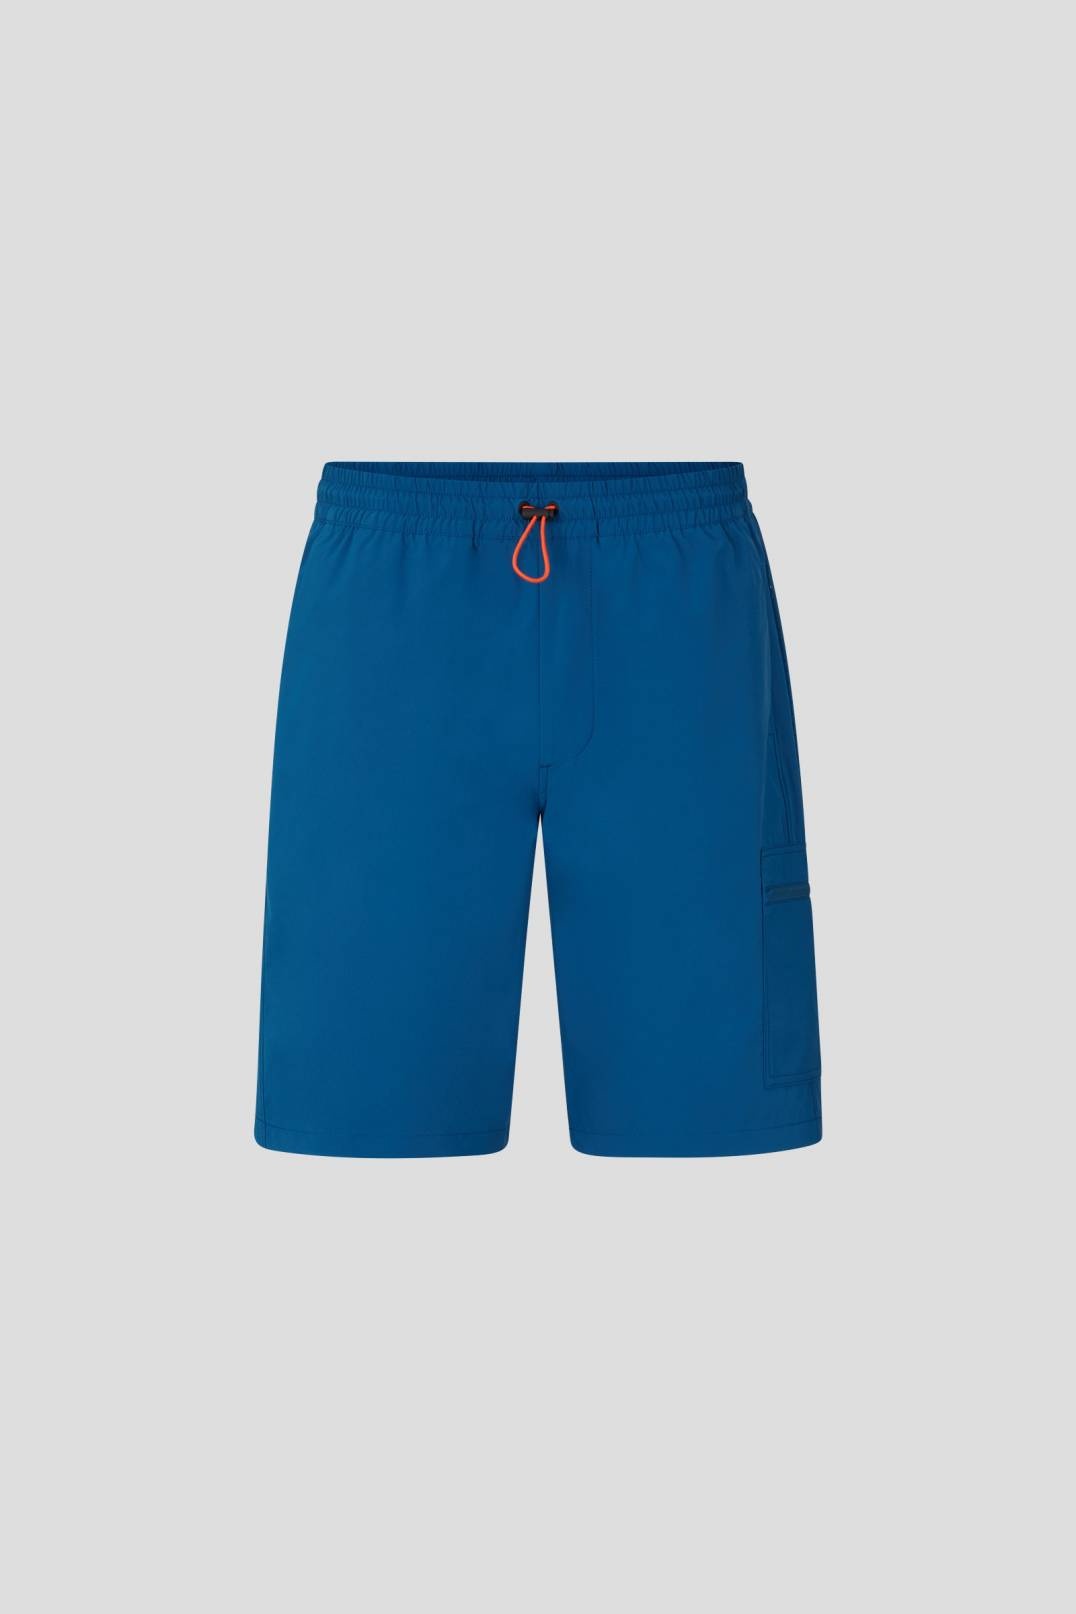 PAVEL FUNCTIONAL SHORTS IN ICE BLUE - 1